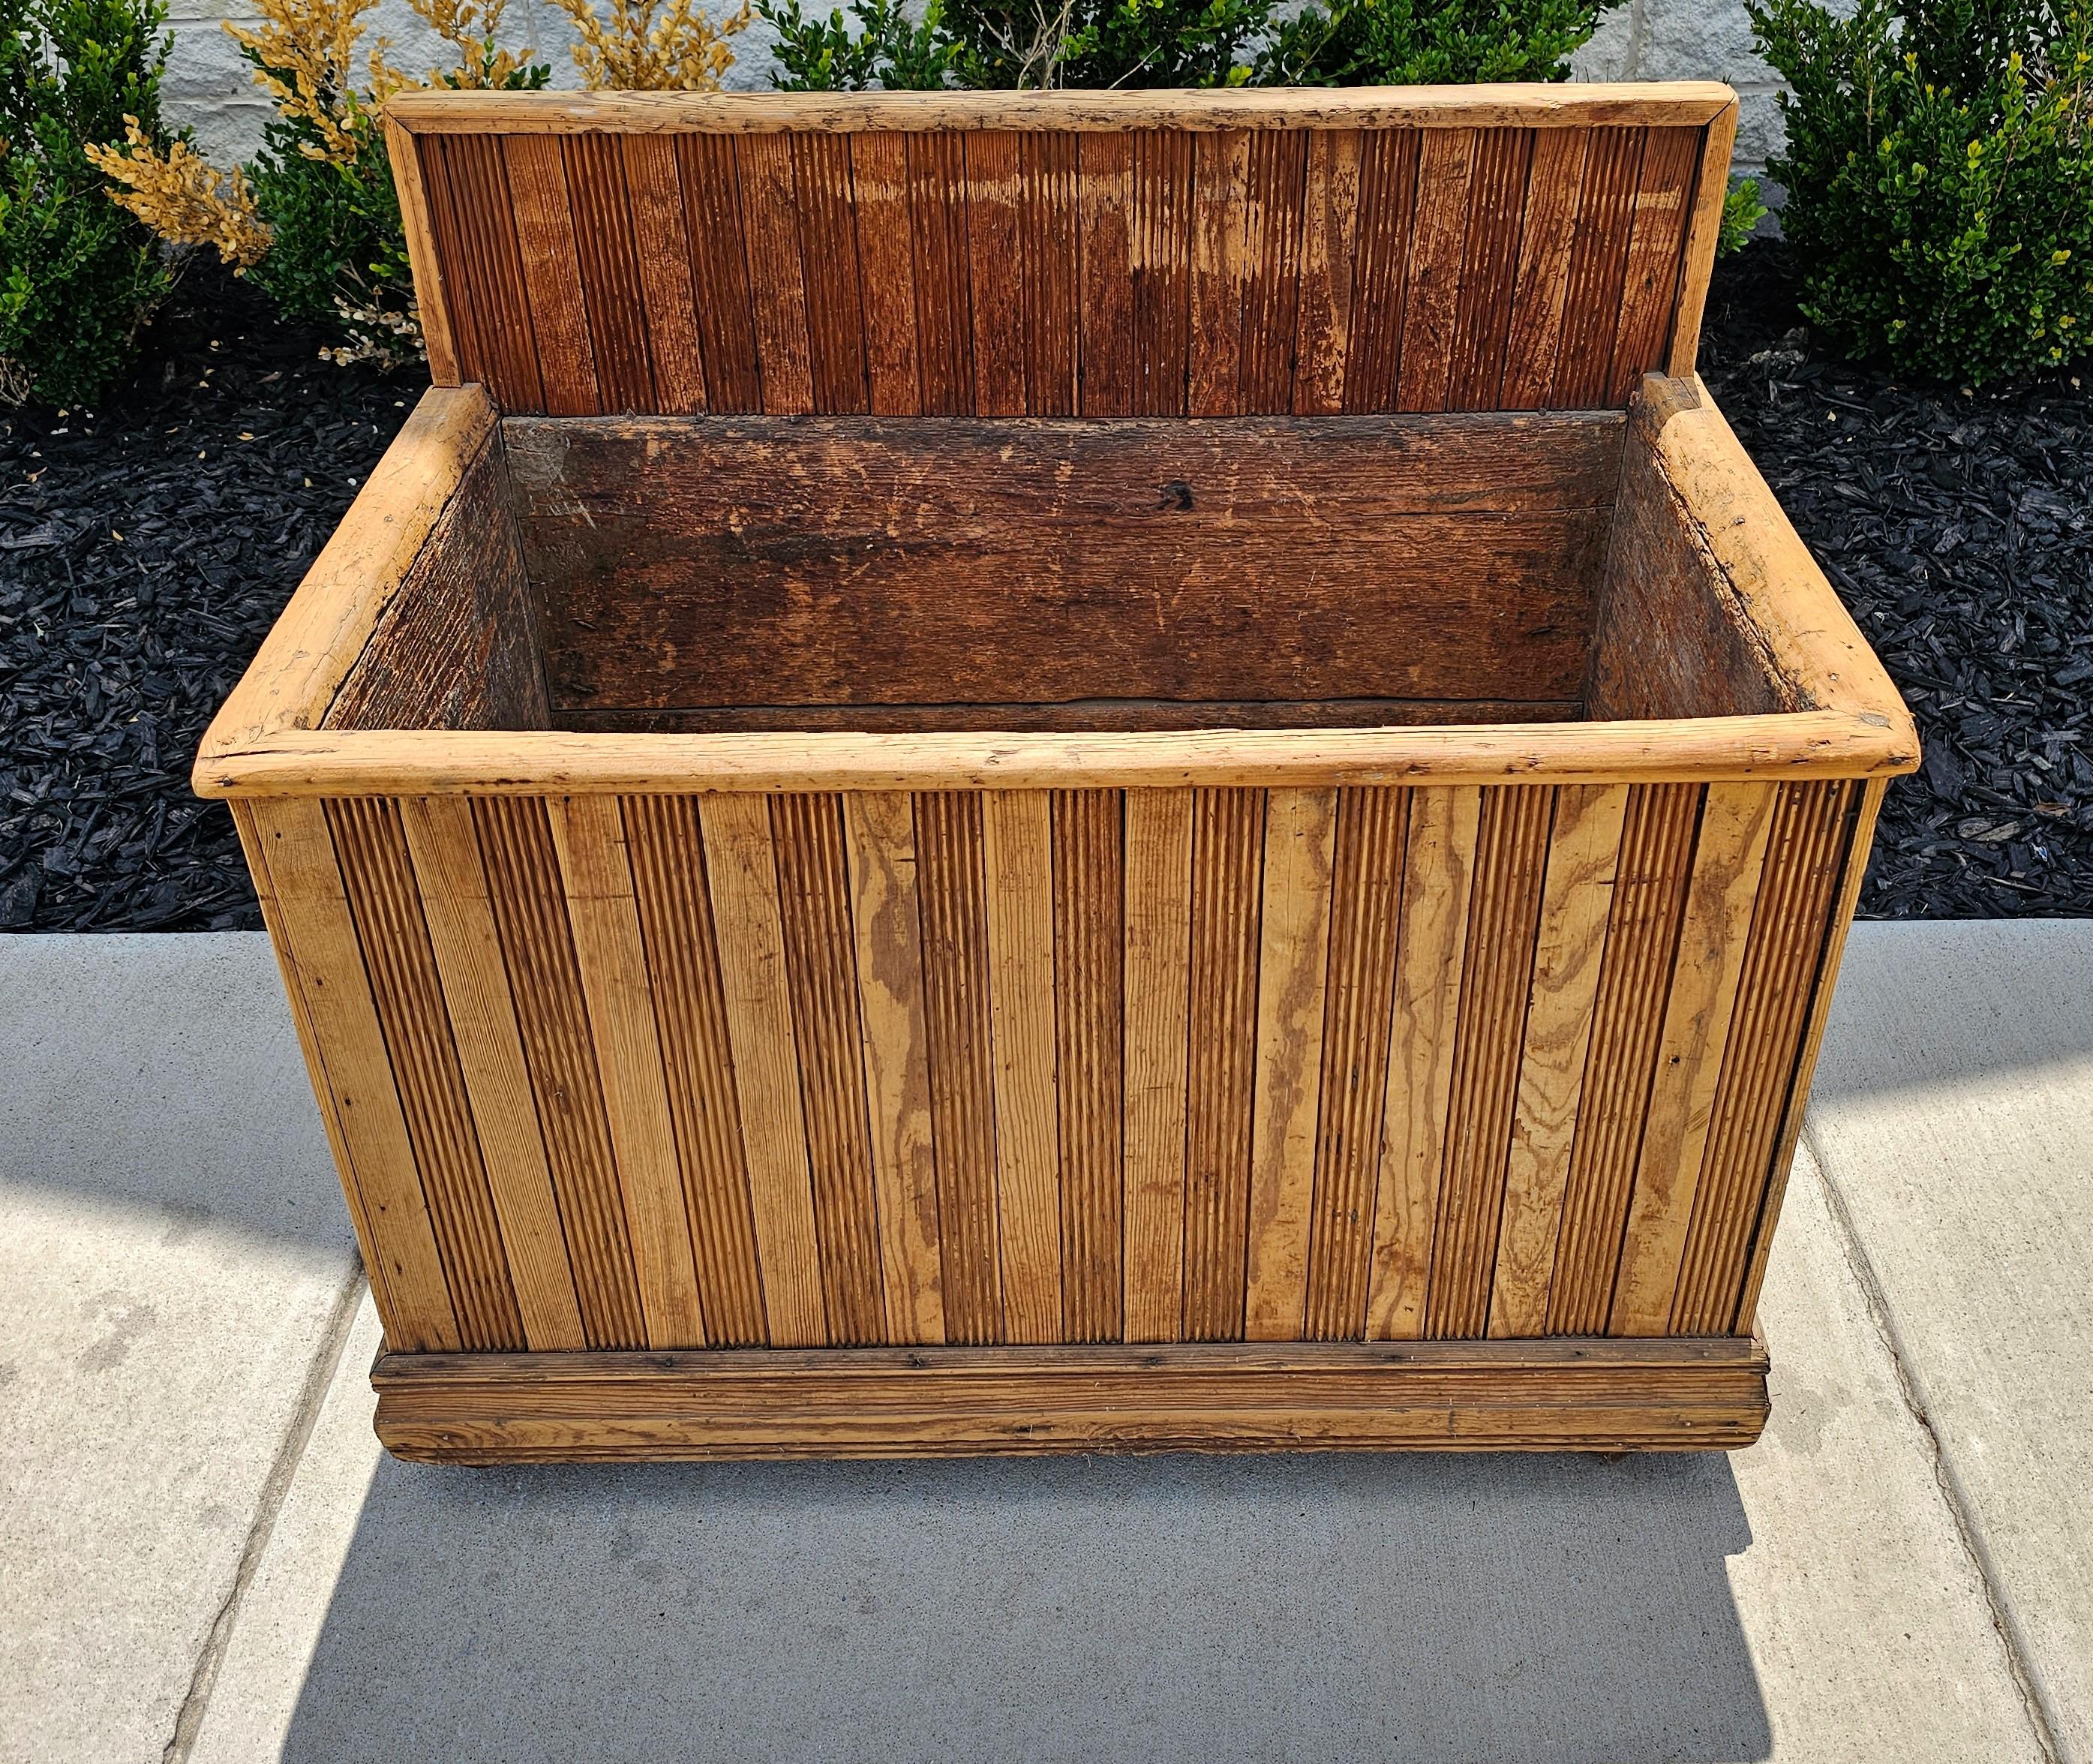 19th Century European Rolling Firewood Bin Storage Chest In Good Condition For Sale In Forney, TX